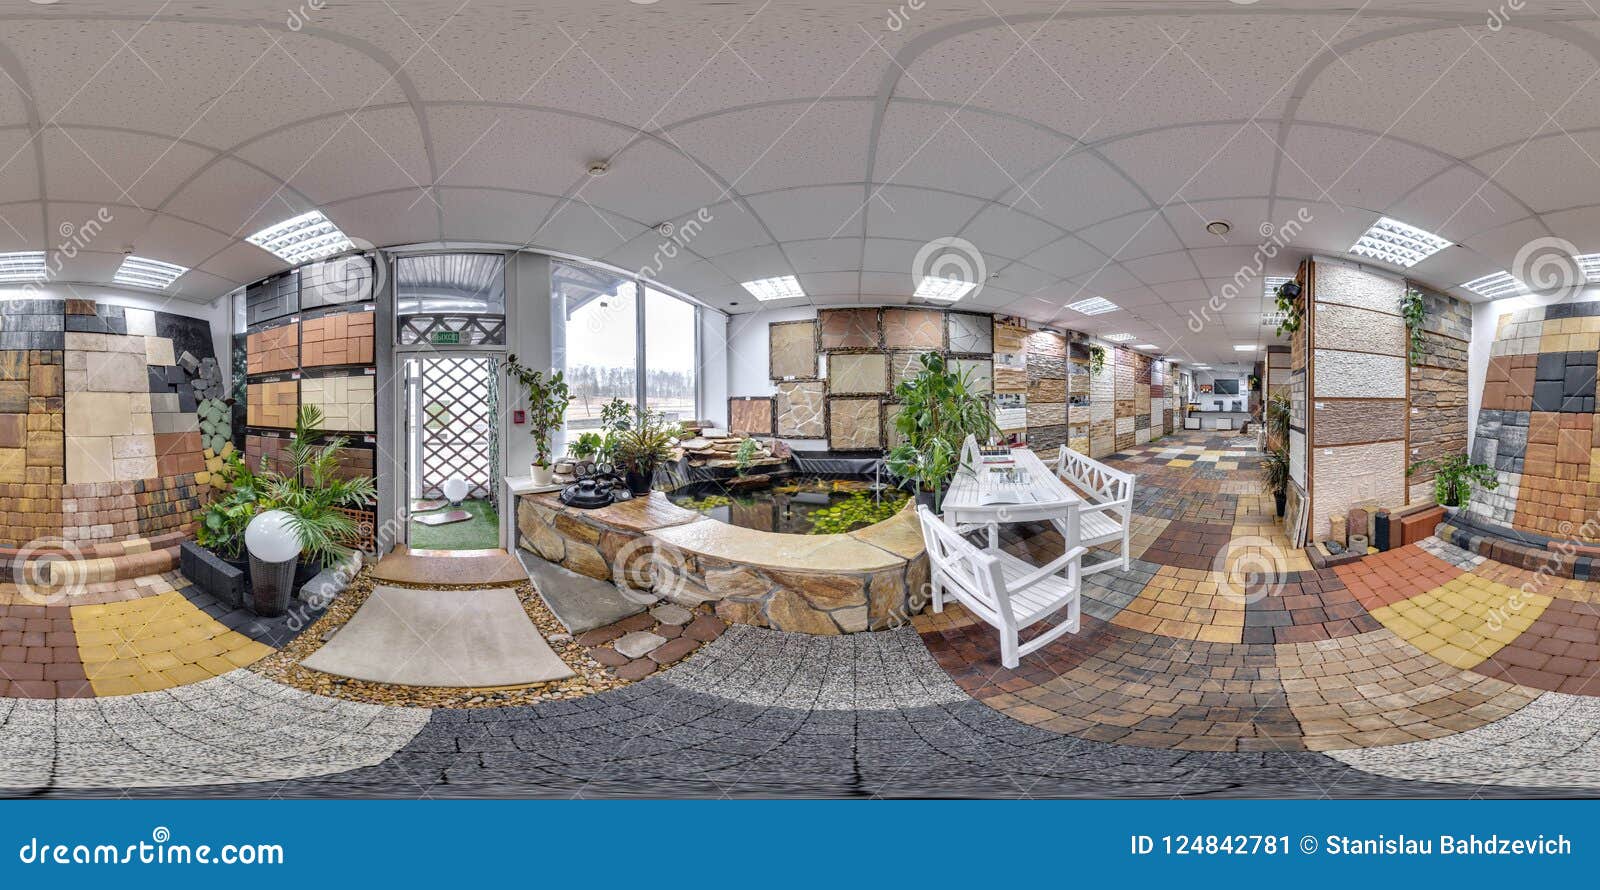 Moscow 2018 3d Spherical Panorama With 360 Degree Viewing Angle